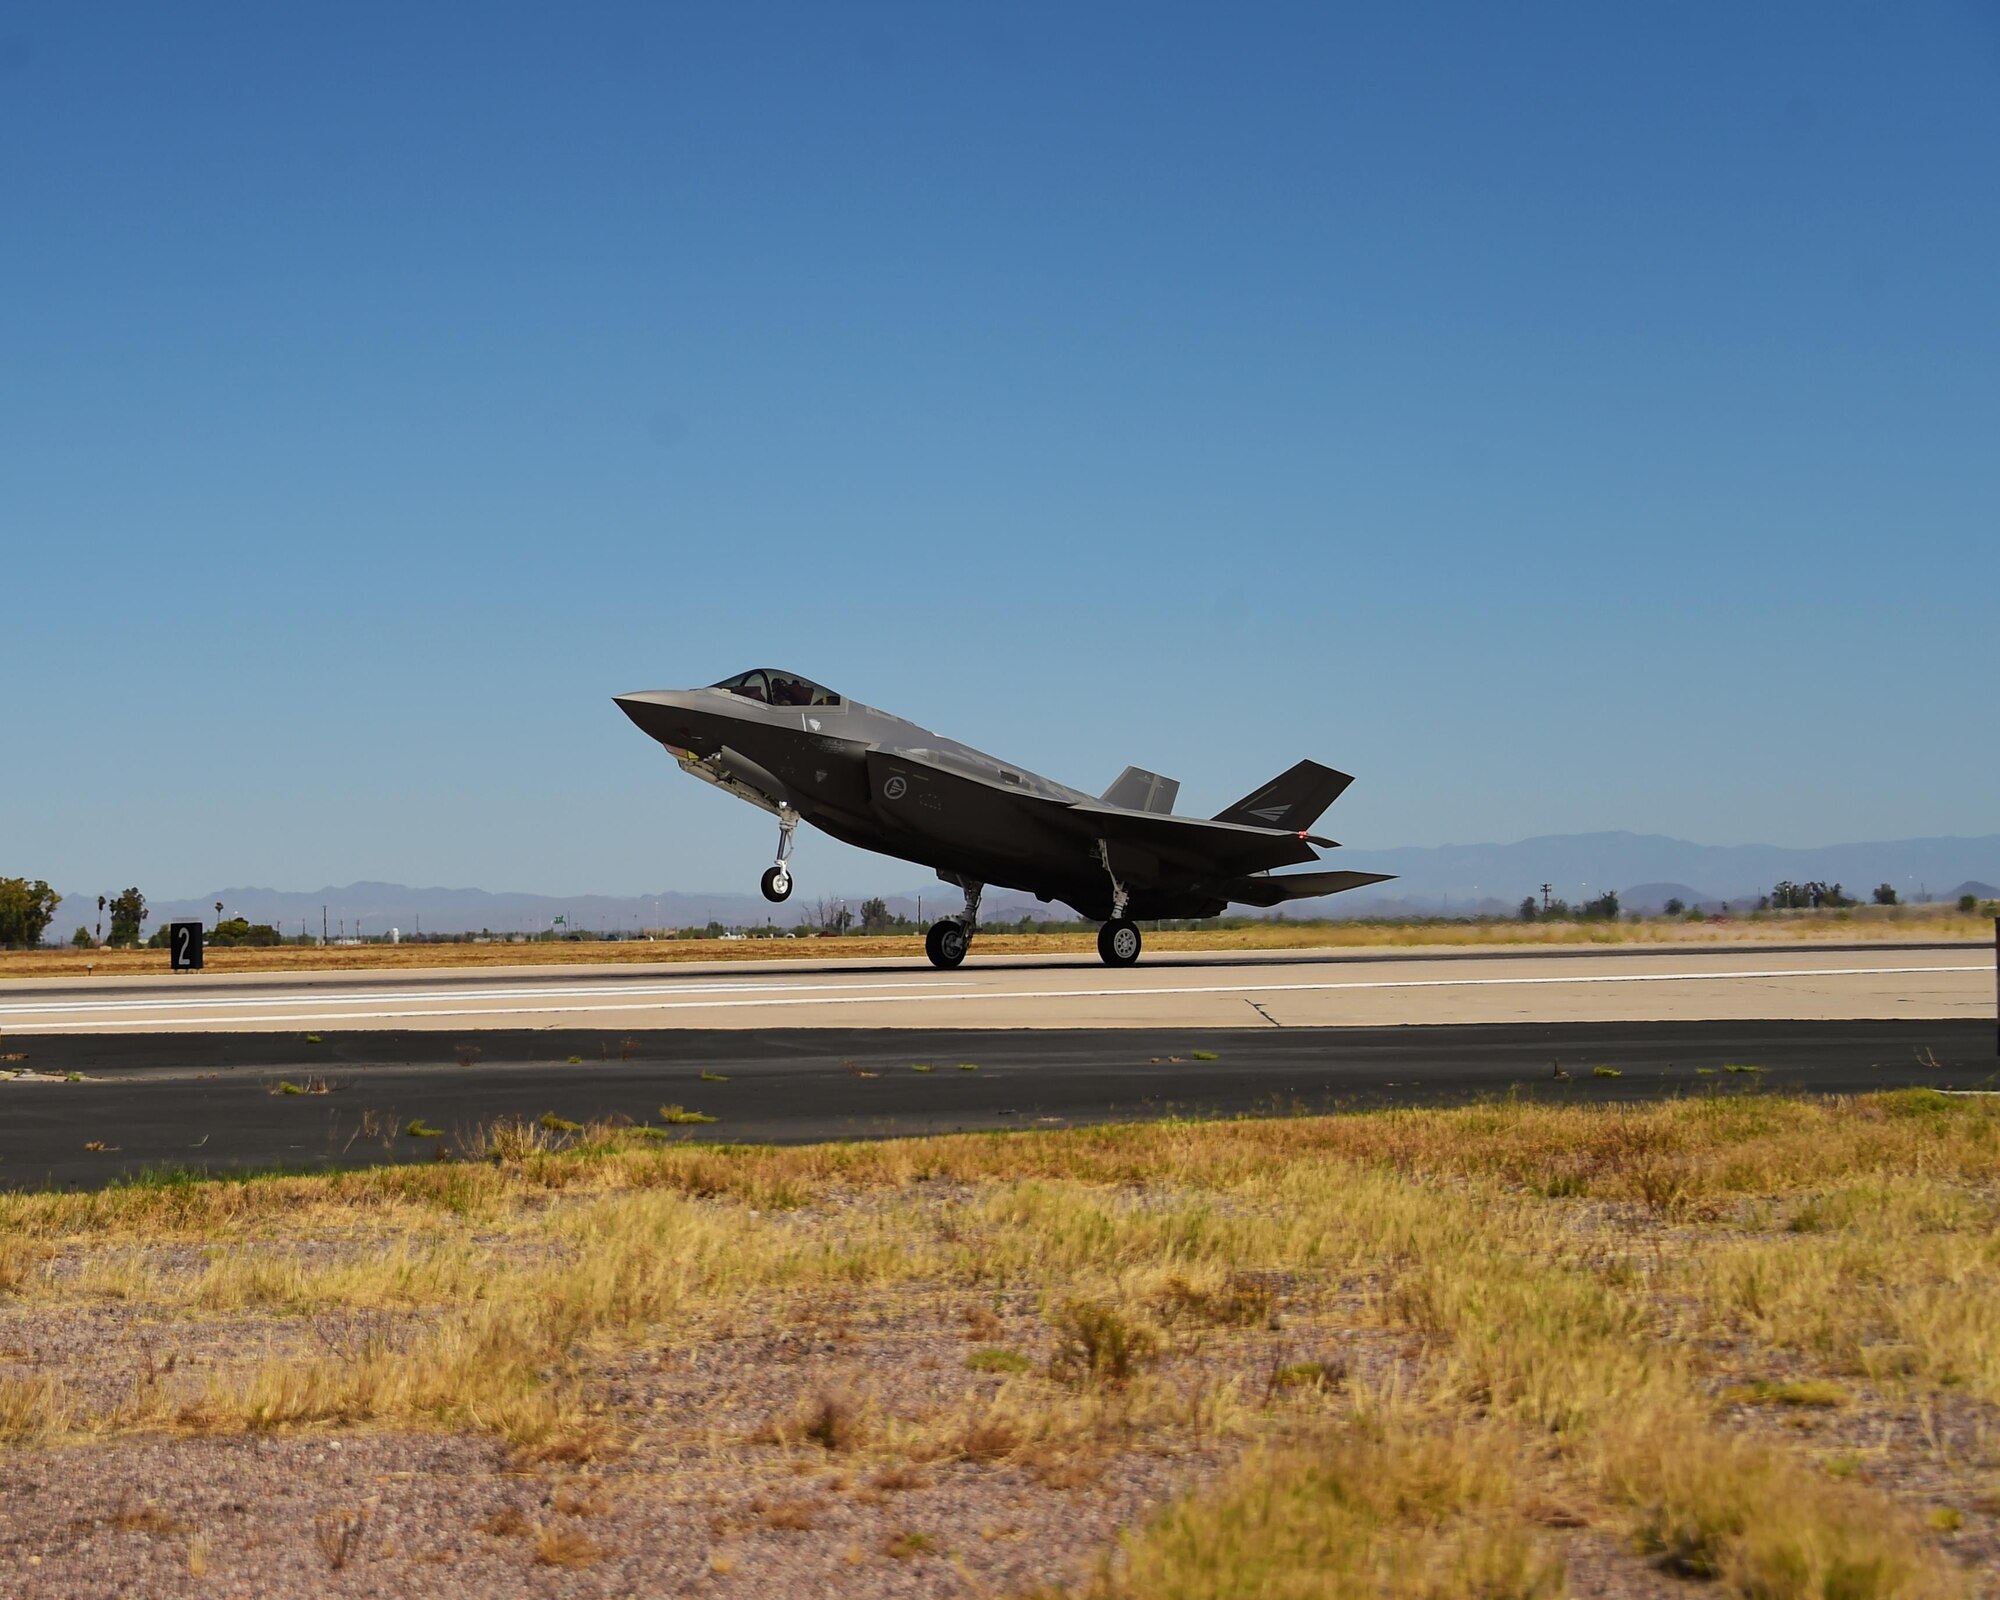 AM-5, Norway’s fifth F-35 Lightning II, touches down for the first time May 25, 2017 at Luke Air Force Base, Ariz. With nine countries involved in its development (United States, United Kingdom, Italy, Netherlands, Turkey, Canada, Denmark, Norway and Australia), the F-35 represents a new model of international cooperation, ensuring U.S. and Coalition partner security well into the 21st Century. (U.S. Air Force photo by Airman 1st Class Caleb Worpel)